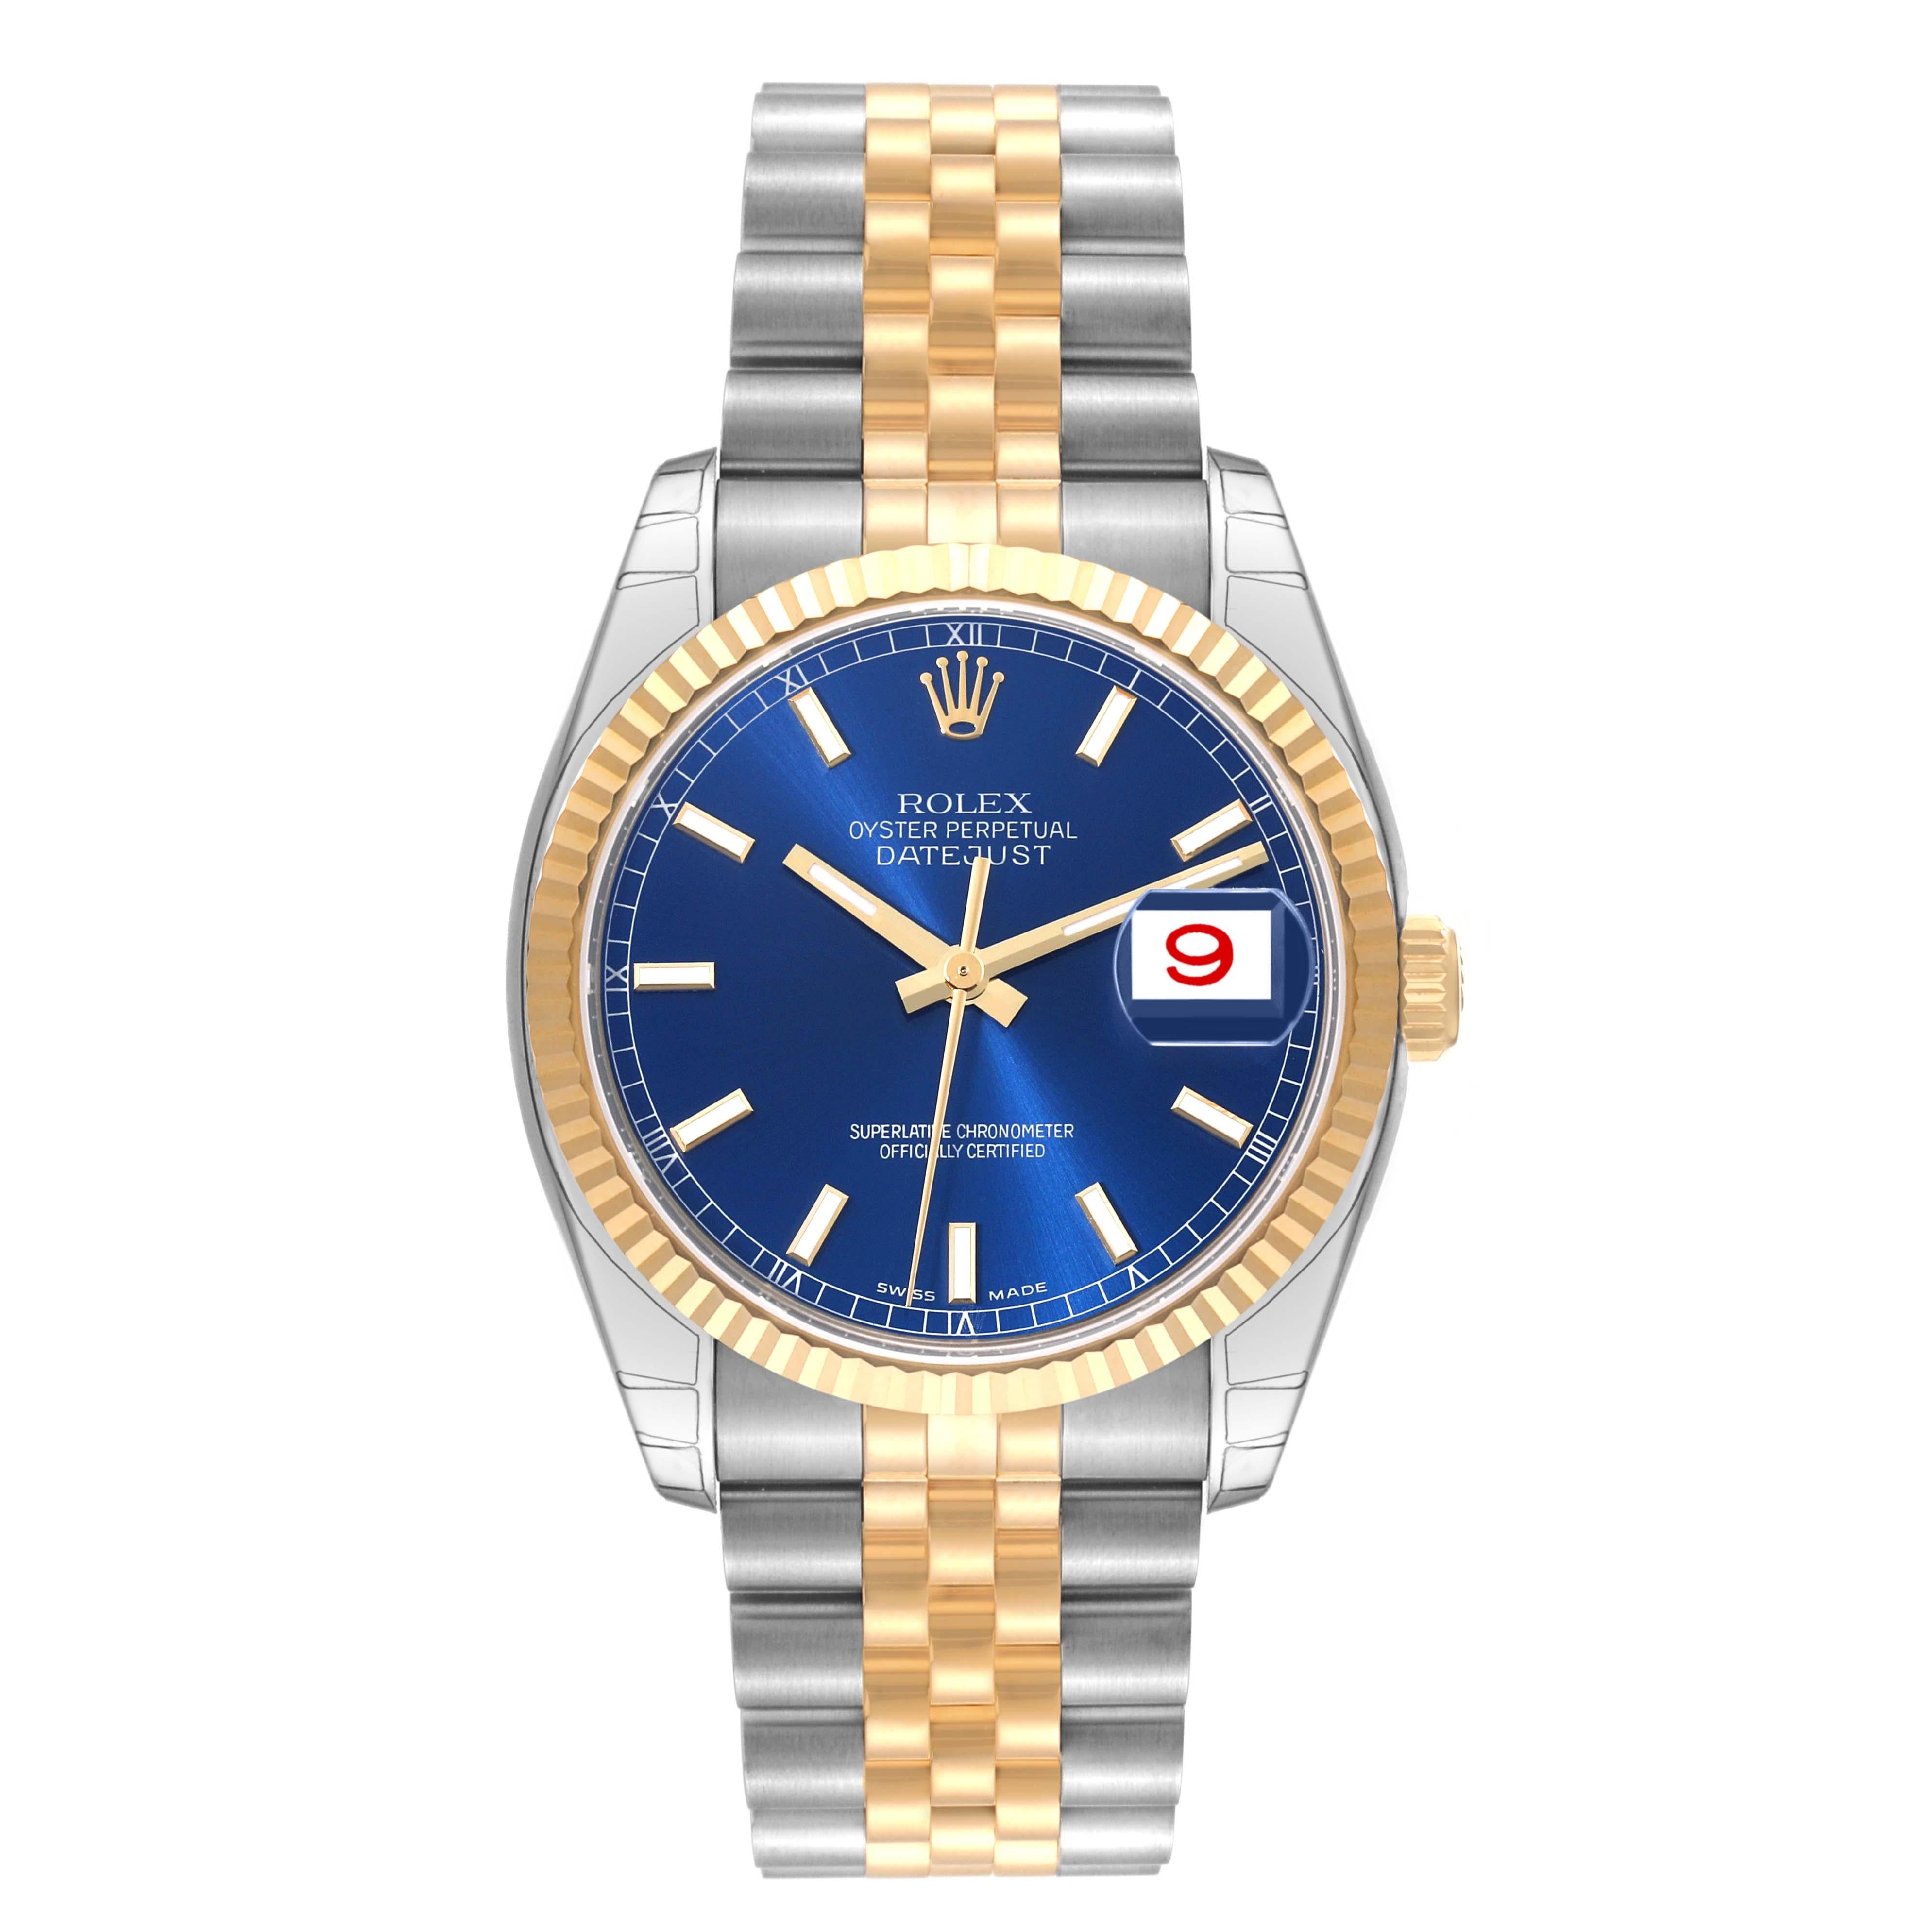 Rolex Datejust Steel Yellow Gold Blue Dial Mens Watch 116233 Box Papers 2